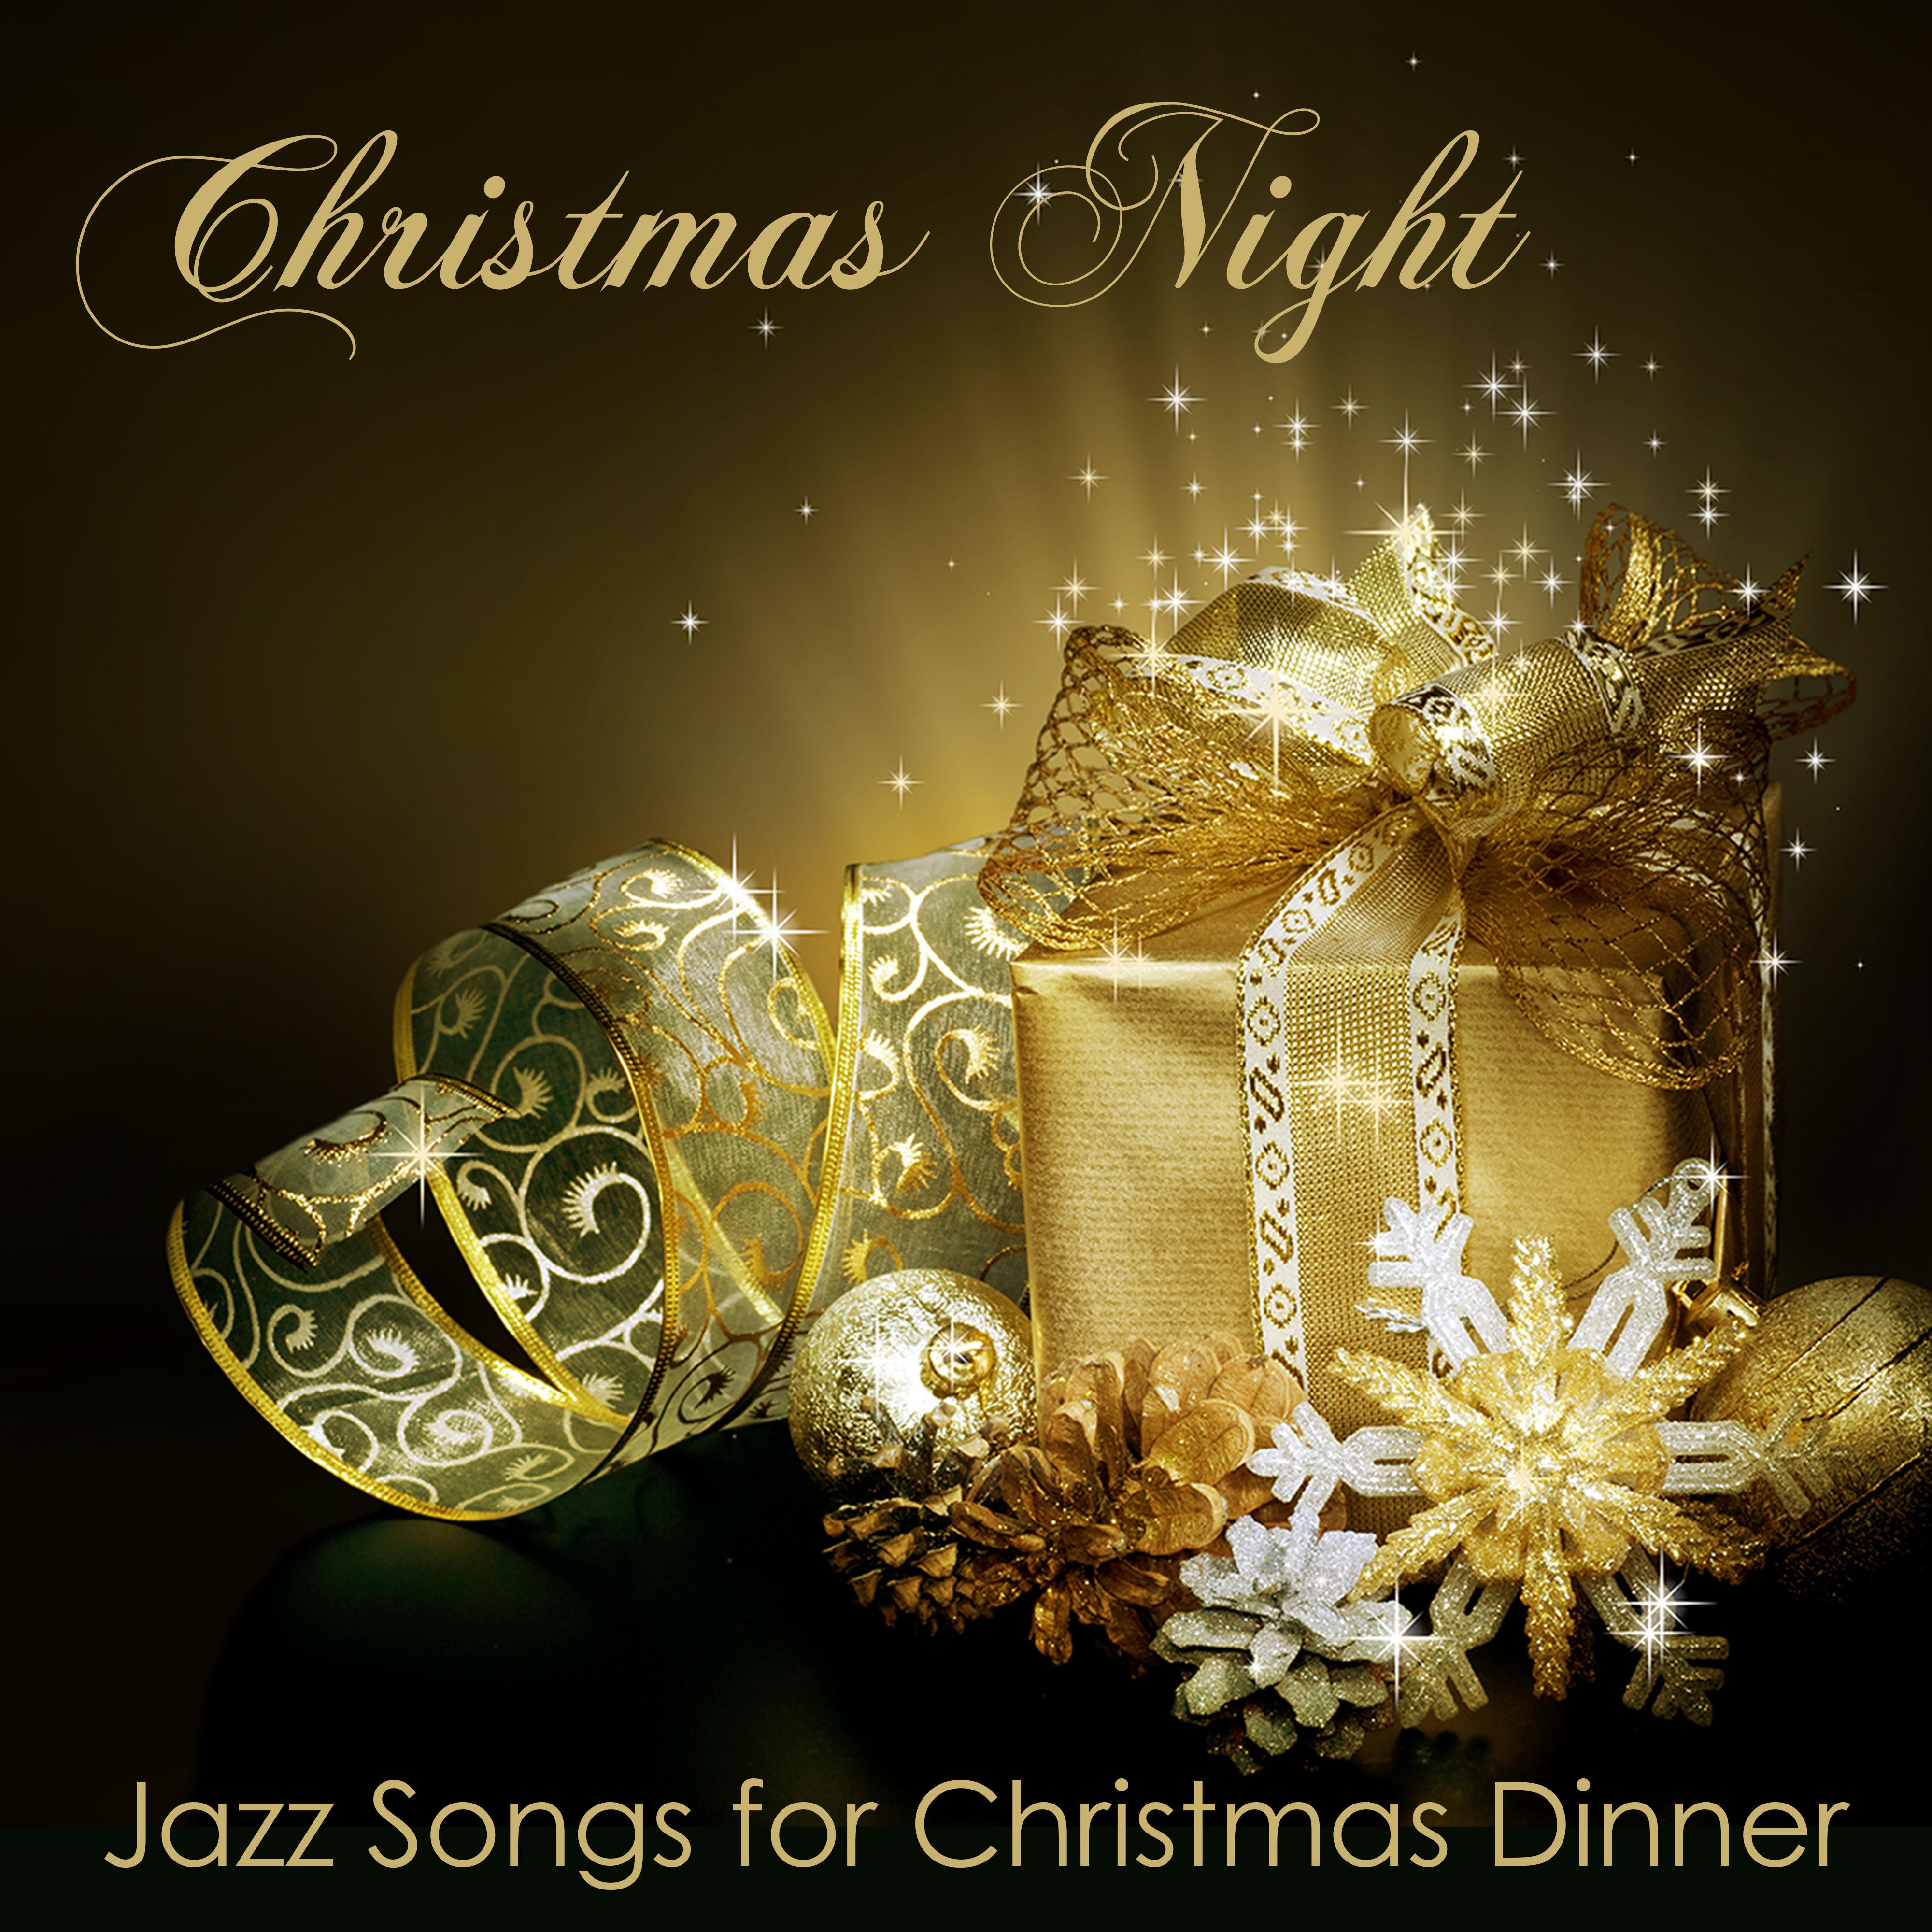 Christmas Night  Solo Piano Traditionals and Jazz Songs for Christmas Dinner  Piano Bar Music